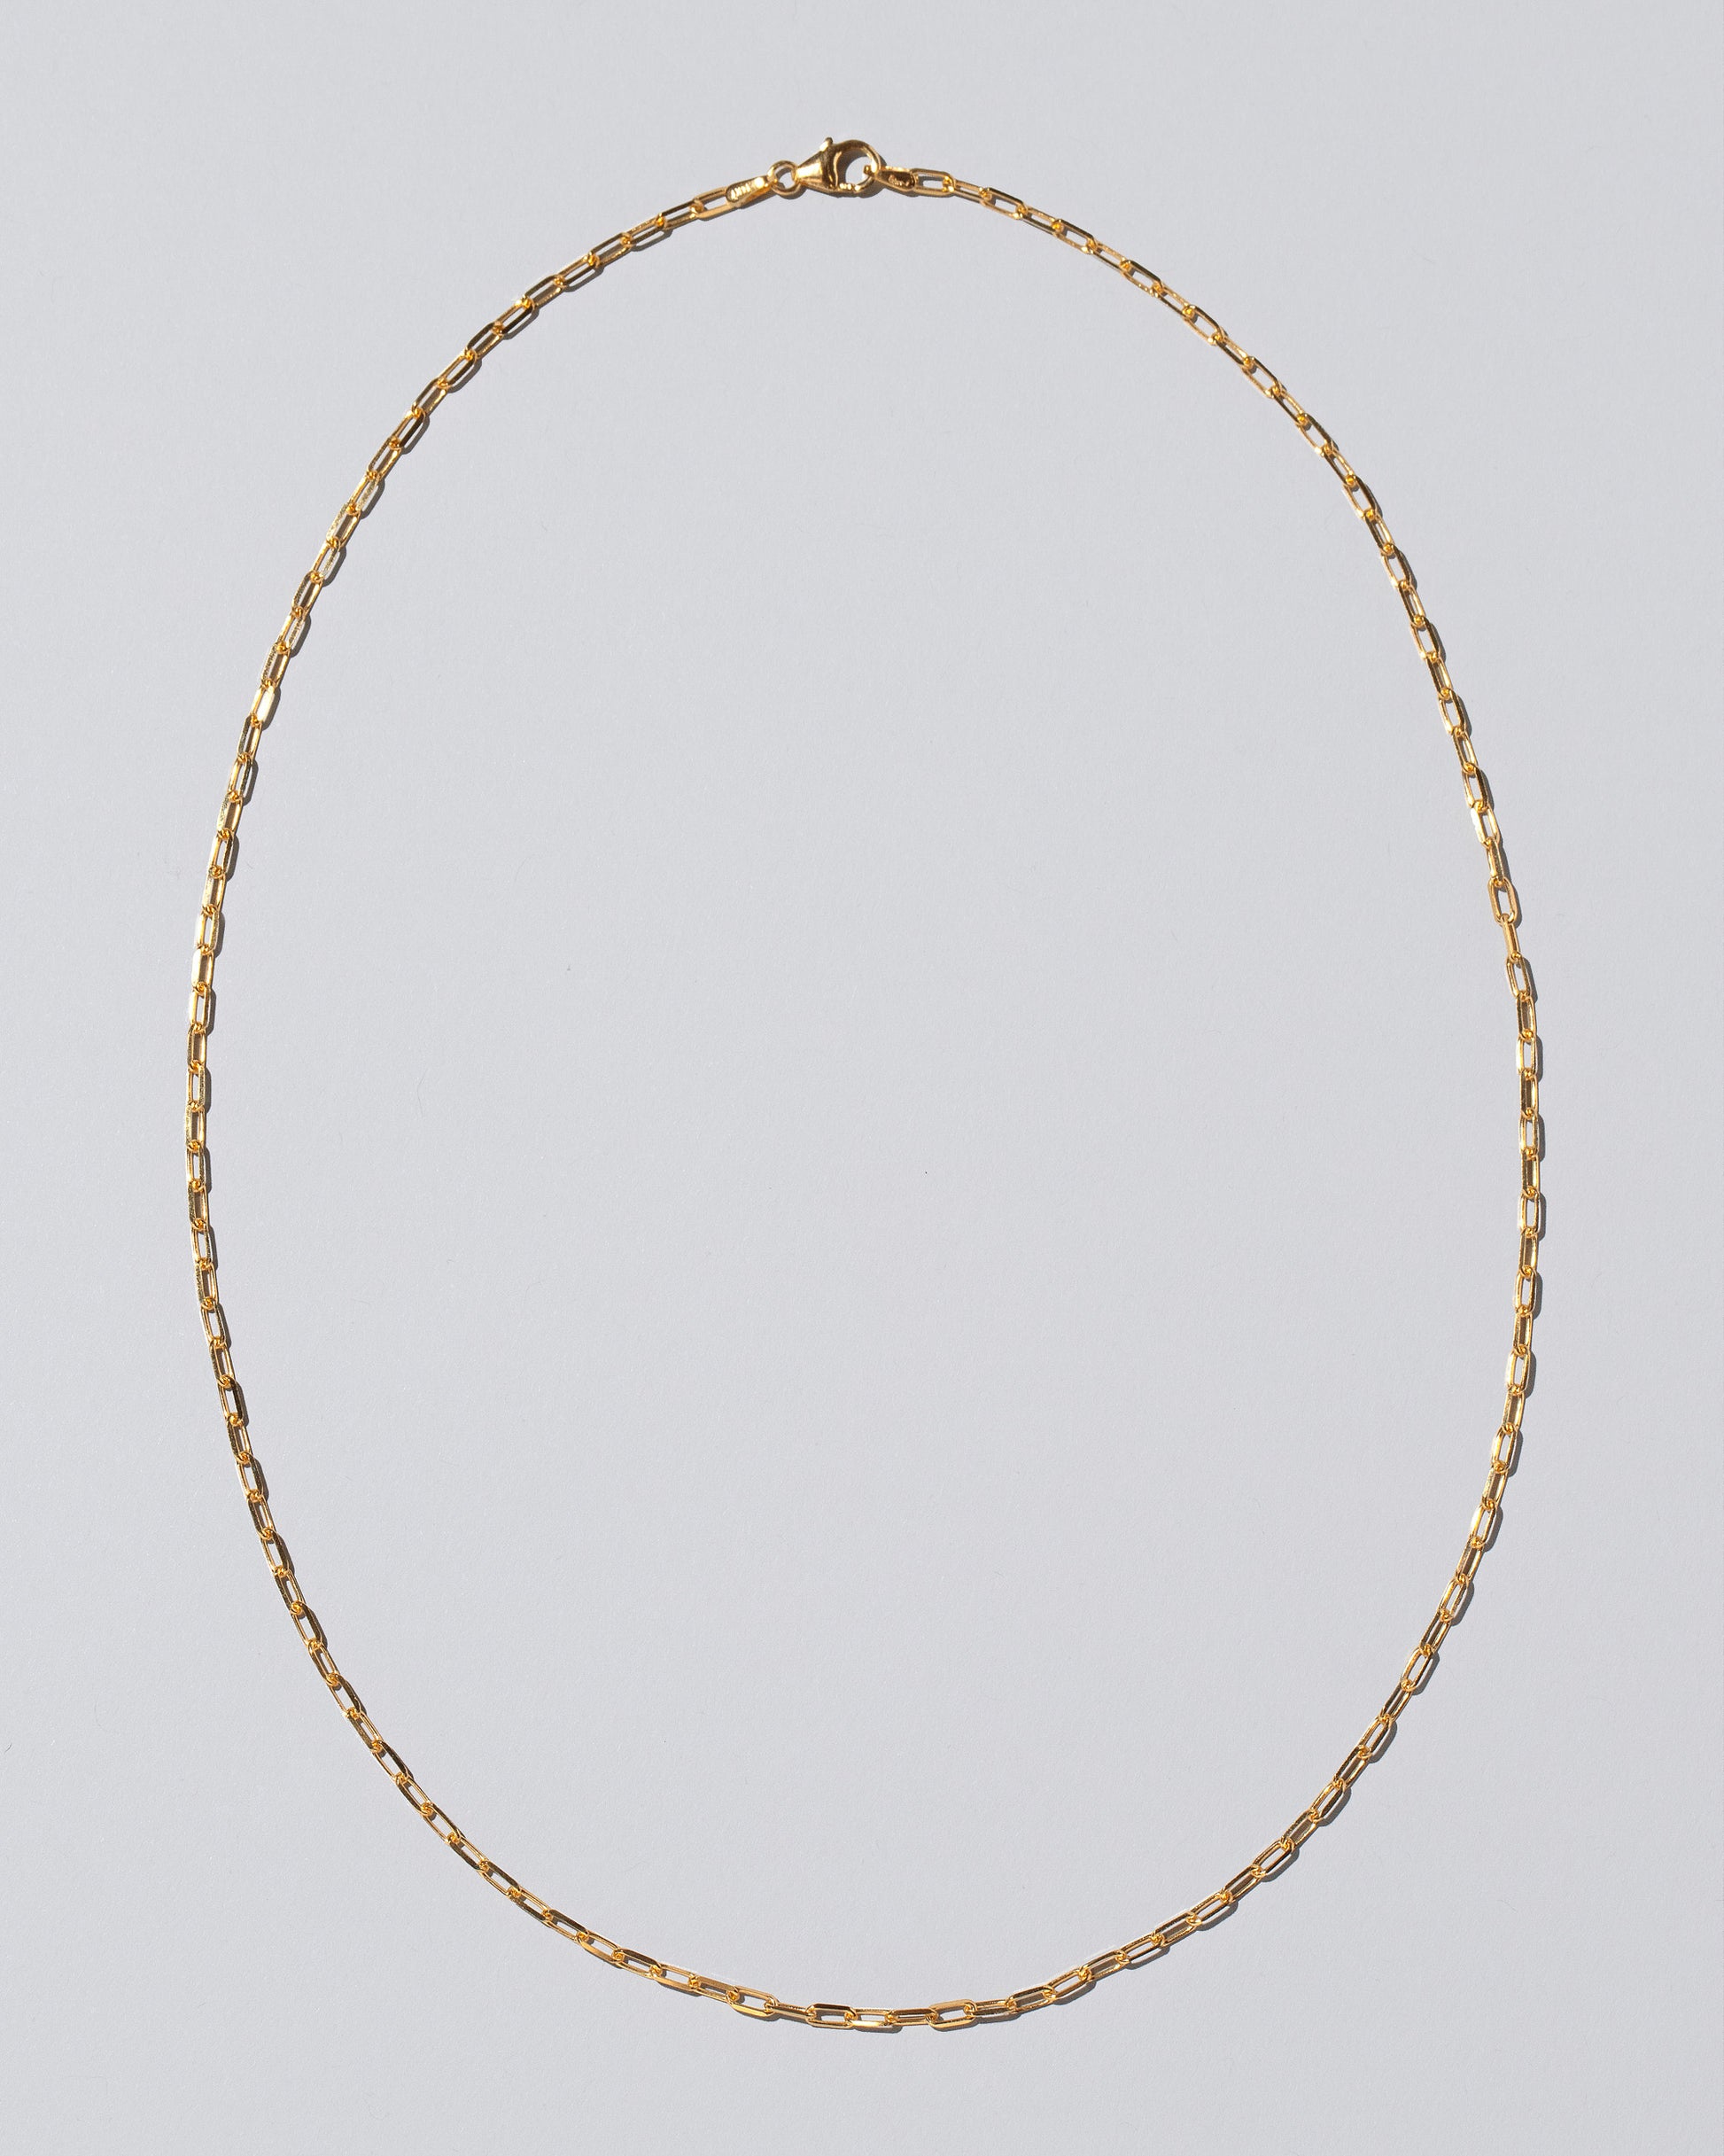 3mm Lightweight Beveled Oval Chain Necklace on light color background.